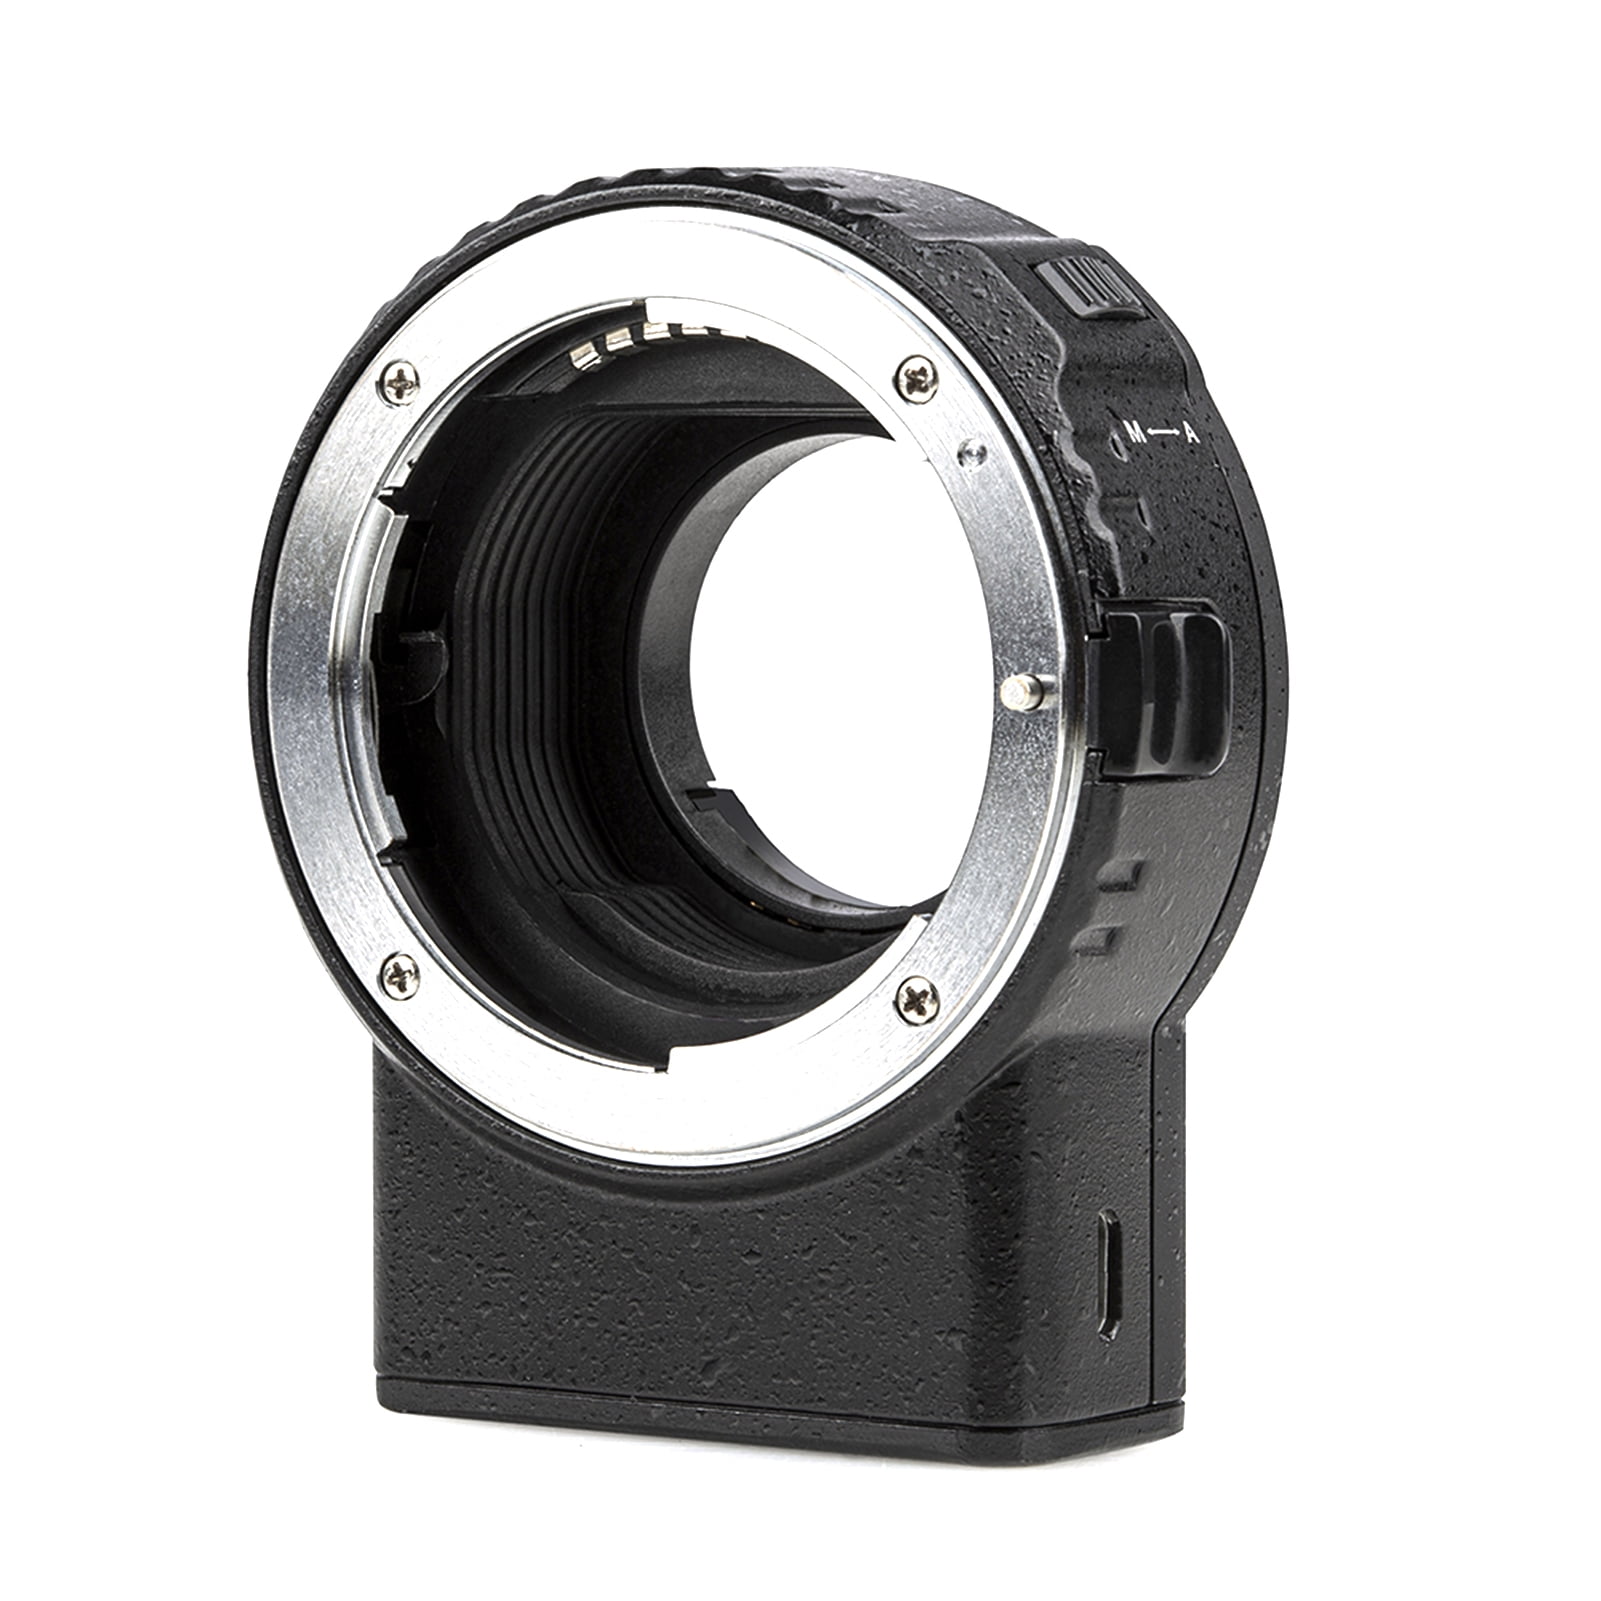 VILTROX NF-M1 Auto Focus Lens Mount Adapter Support VR EXIF Transmitting Compatible with Nikon F Mount Lens to Micro Four Thirds MFT, M4/3 Camera